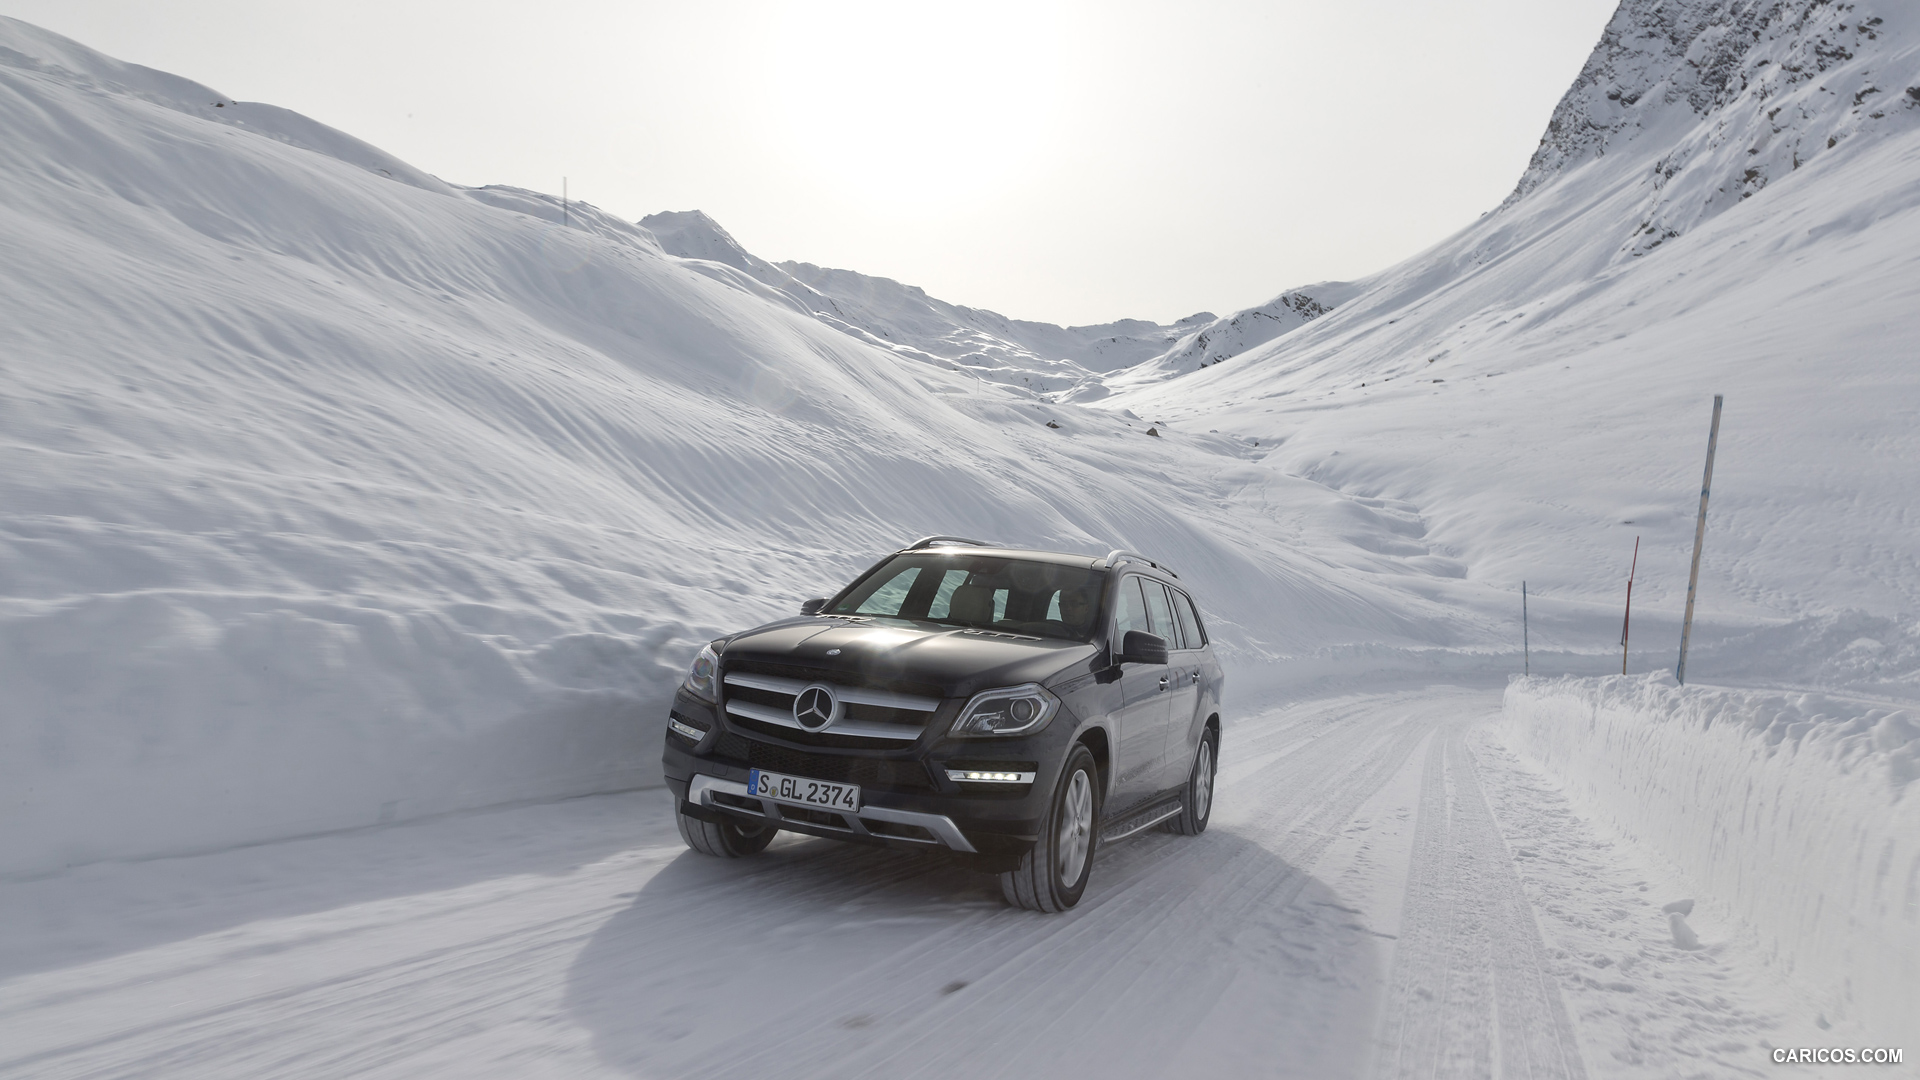 2013 Mercedes-Benz GL 500 4MATIC on Snow - Front, #228 of 259